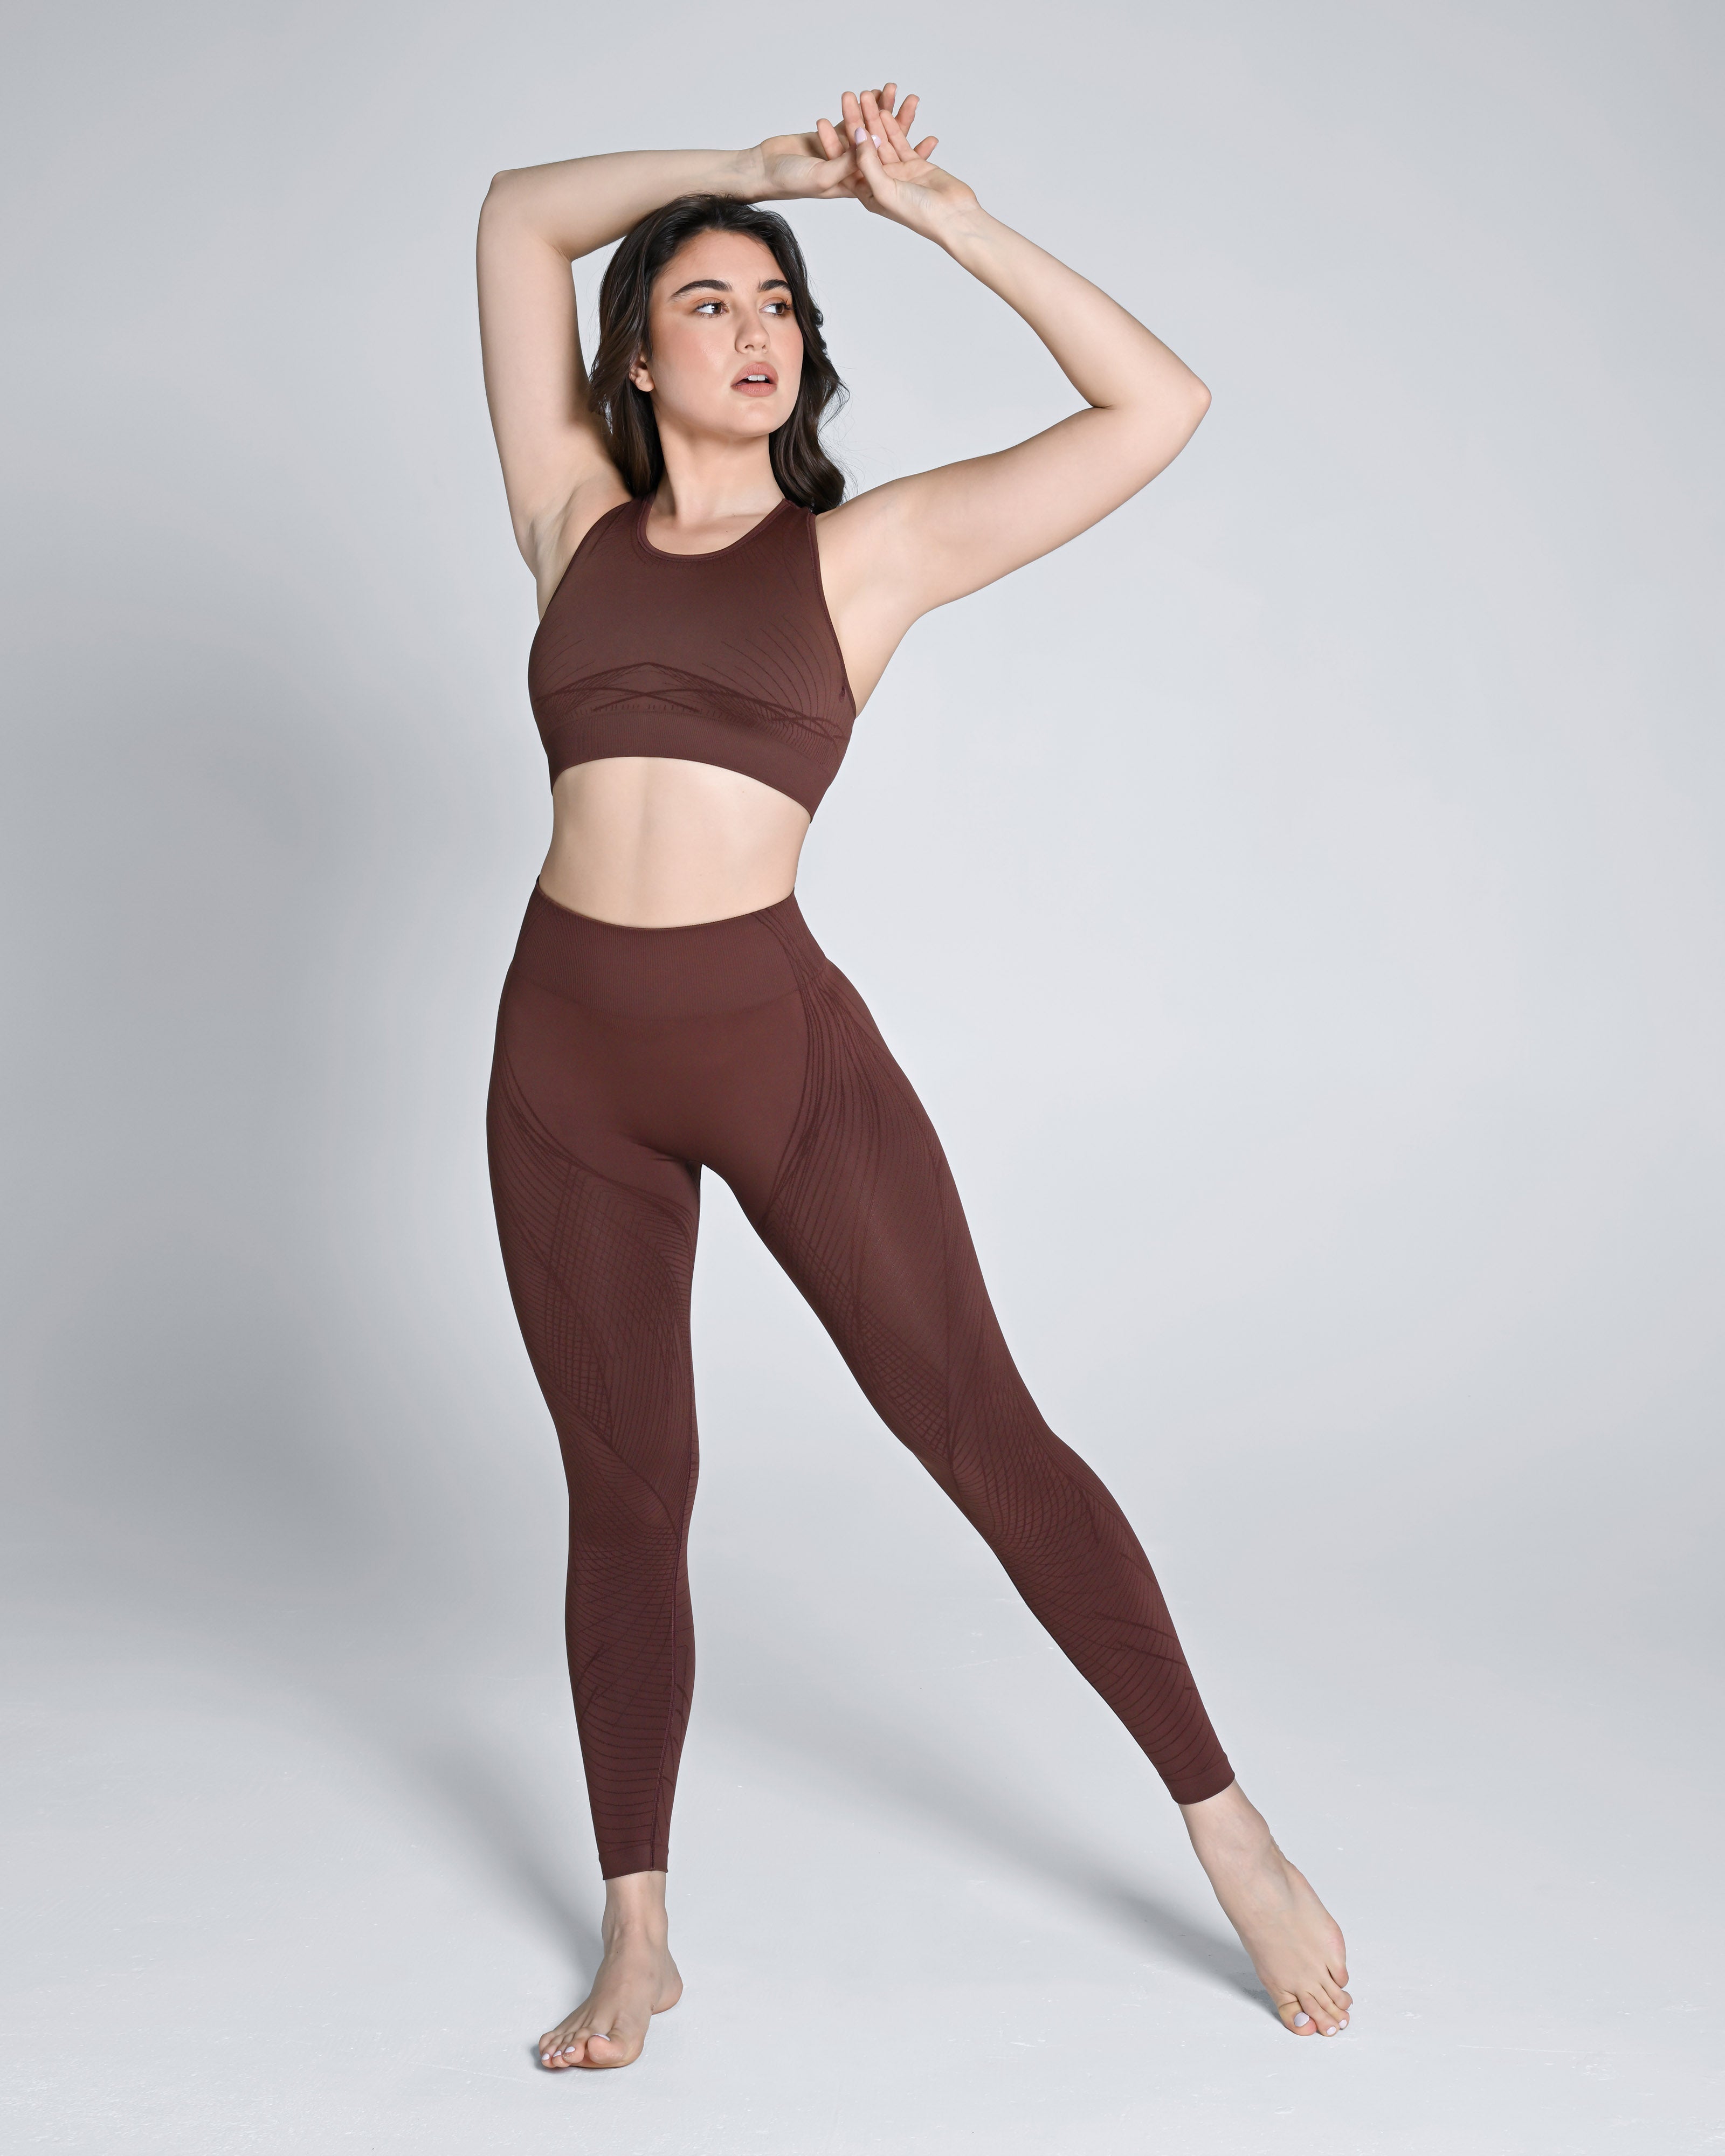 Workouts by Katya, Classic Ribbed Cropped Leggings in Camel Tan, Women's  Large